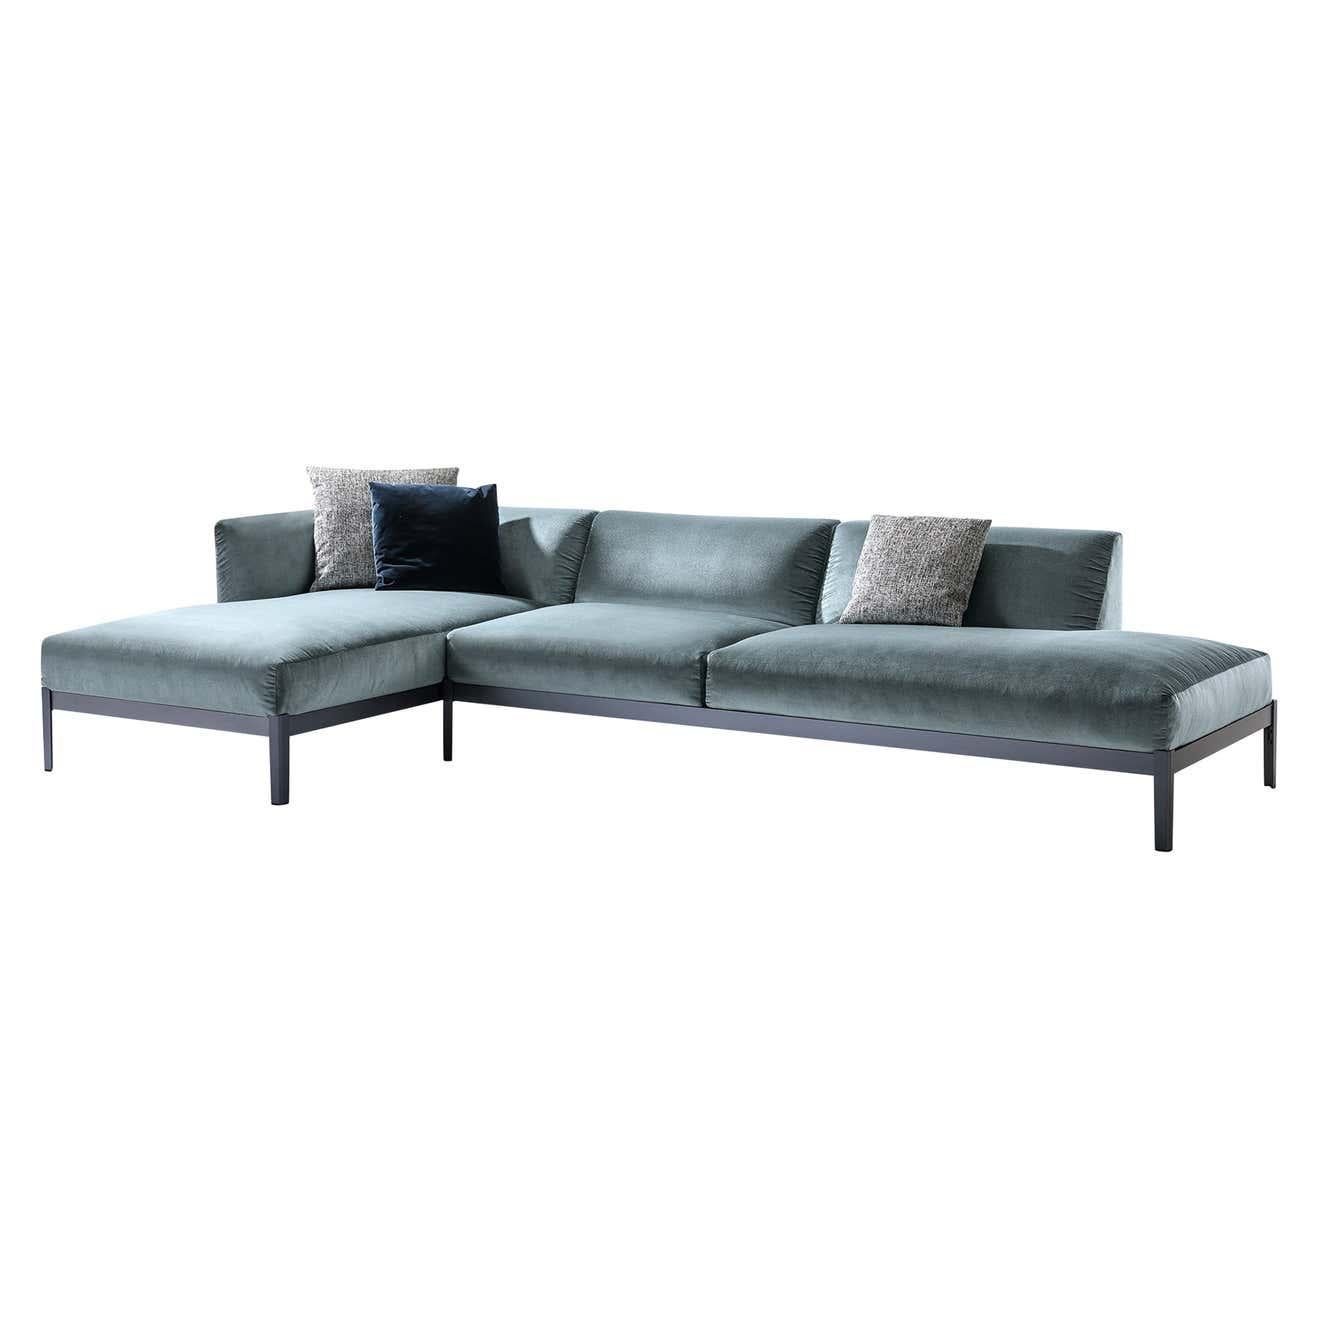 Ronan & Erwan Bourroullec 'Cotone' Sofa, Aluminum and Fabric by Cassina In New Condition For Sale In Barcelona, Barcelona